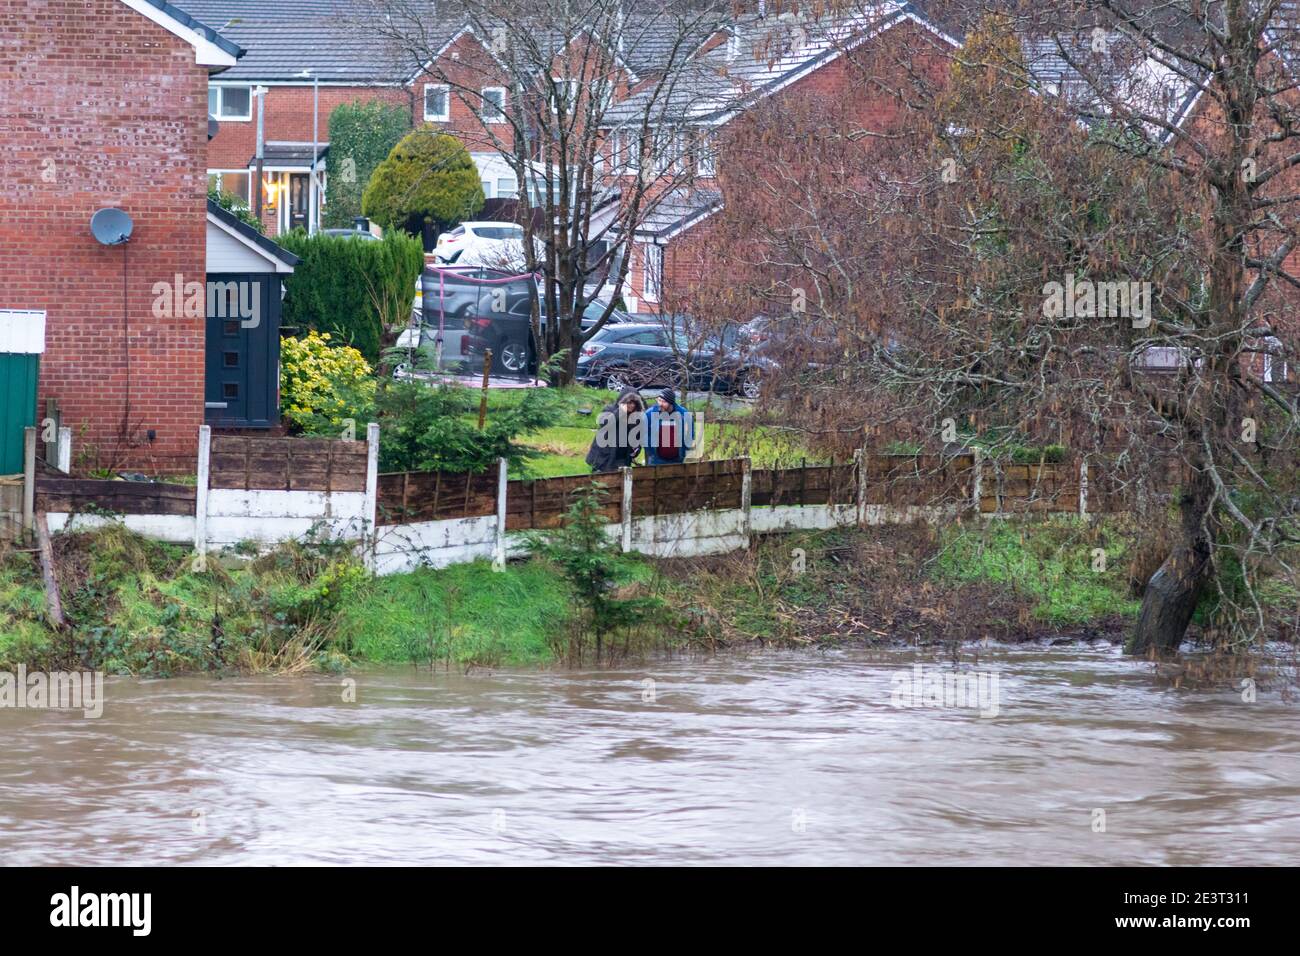 Prestolee, Bolton, England, UK. 20th Jan 2021. Consistent rainfall from Storm Christoph over the last 24 hours has led to the level of the River Irwell rising significantly. A couple at a property in Riverside drive, one of the most flood prone areas of the village, looks out anxiously from their garden onto the raging river. A flood warning has now been issued for the River Irwell at Prestolee and Ringley bridges. The village of Prestolee experienced flooding in 2015 and 2020 when the Irwell burst its banks. Credit: Callum Fraser/Alamy Live News Stock Photo